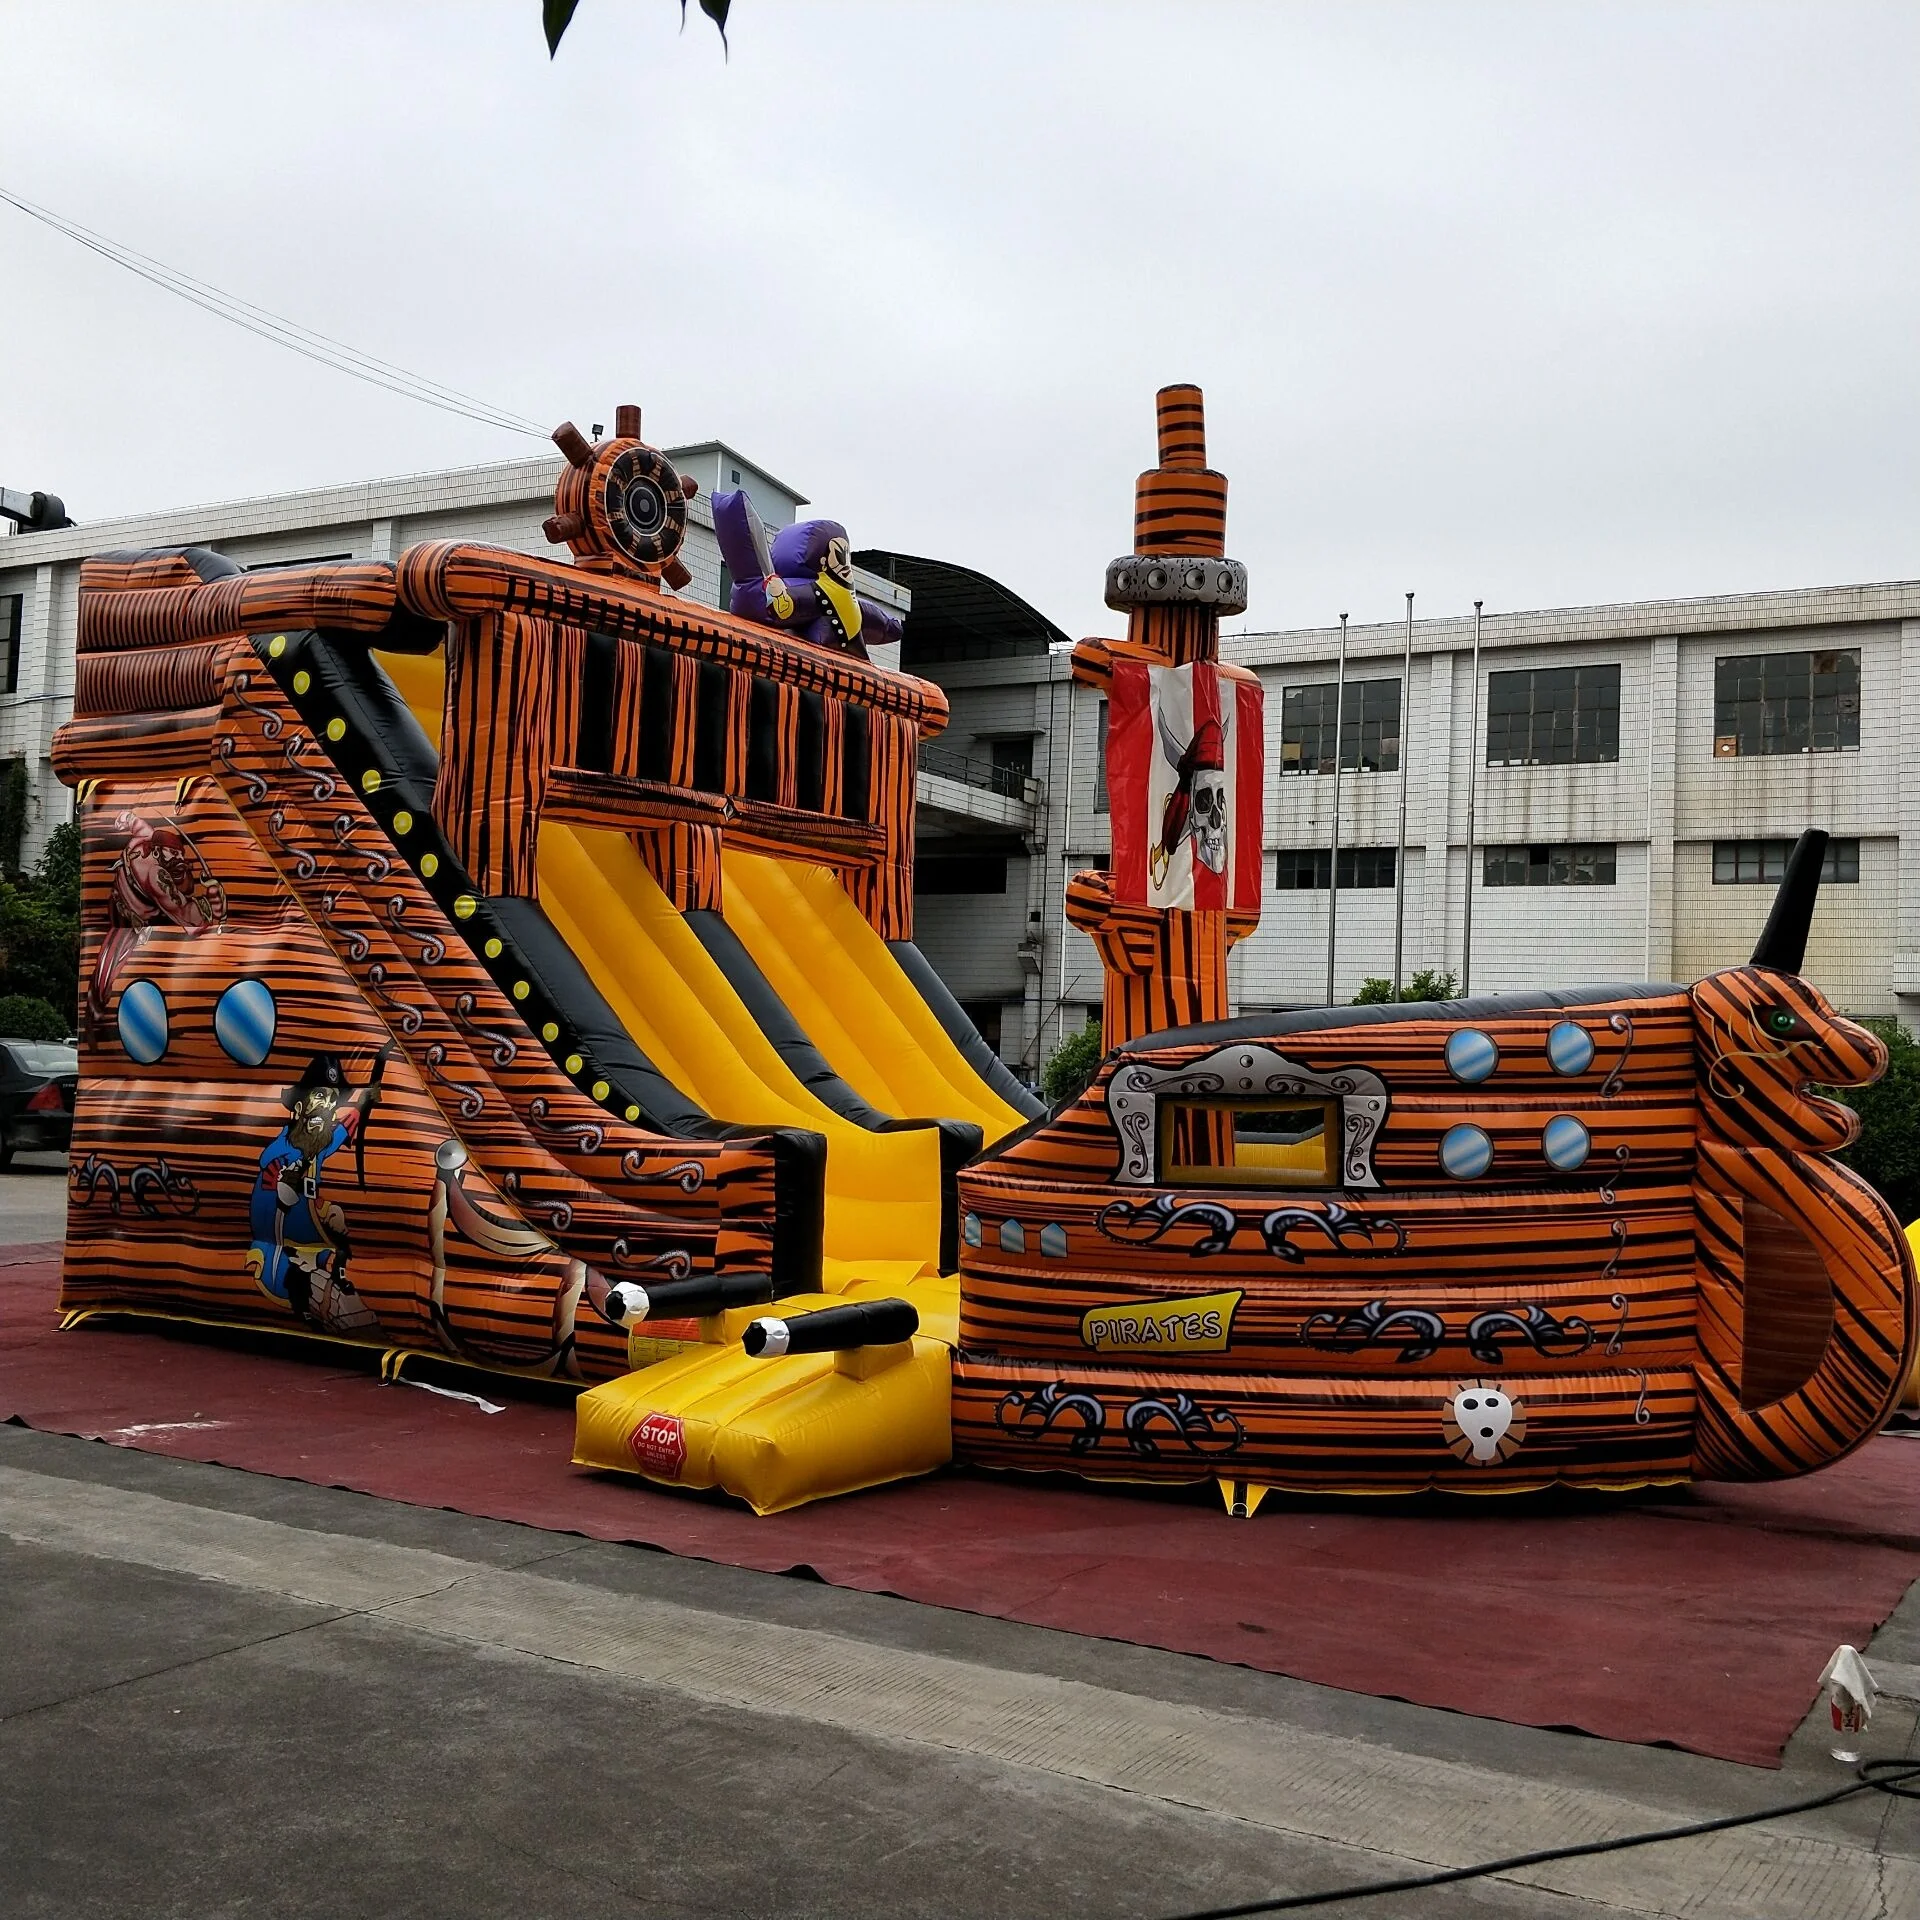 

Hot sale inflatable pirate ship castle slide, pirate ship bouncy castle for sale, Multi-color or customized color